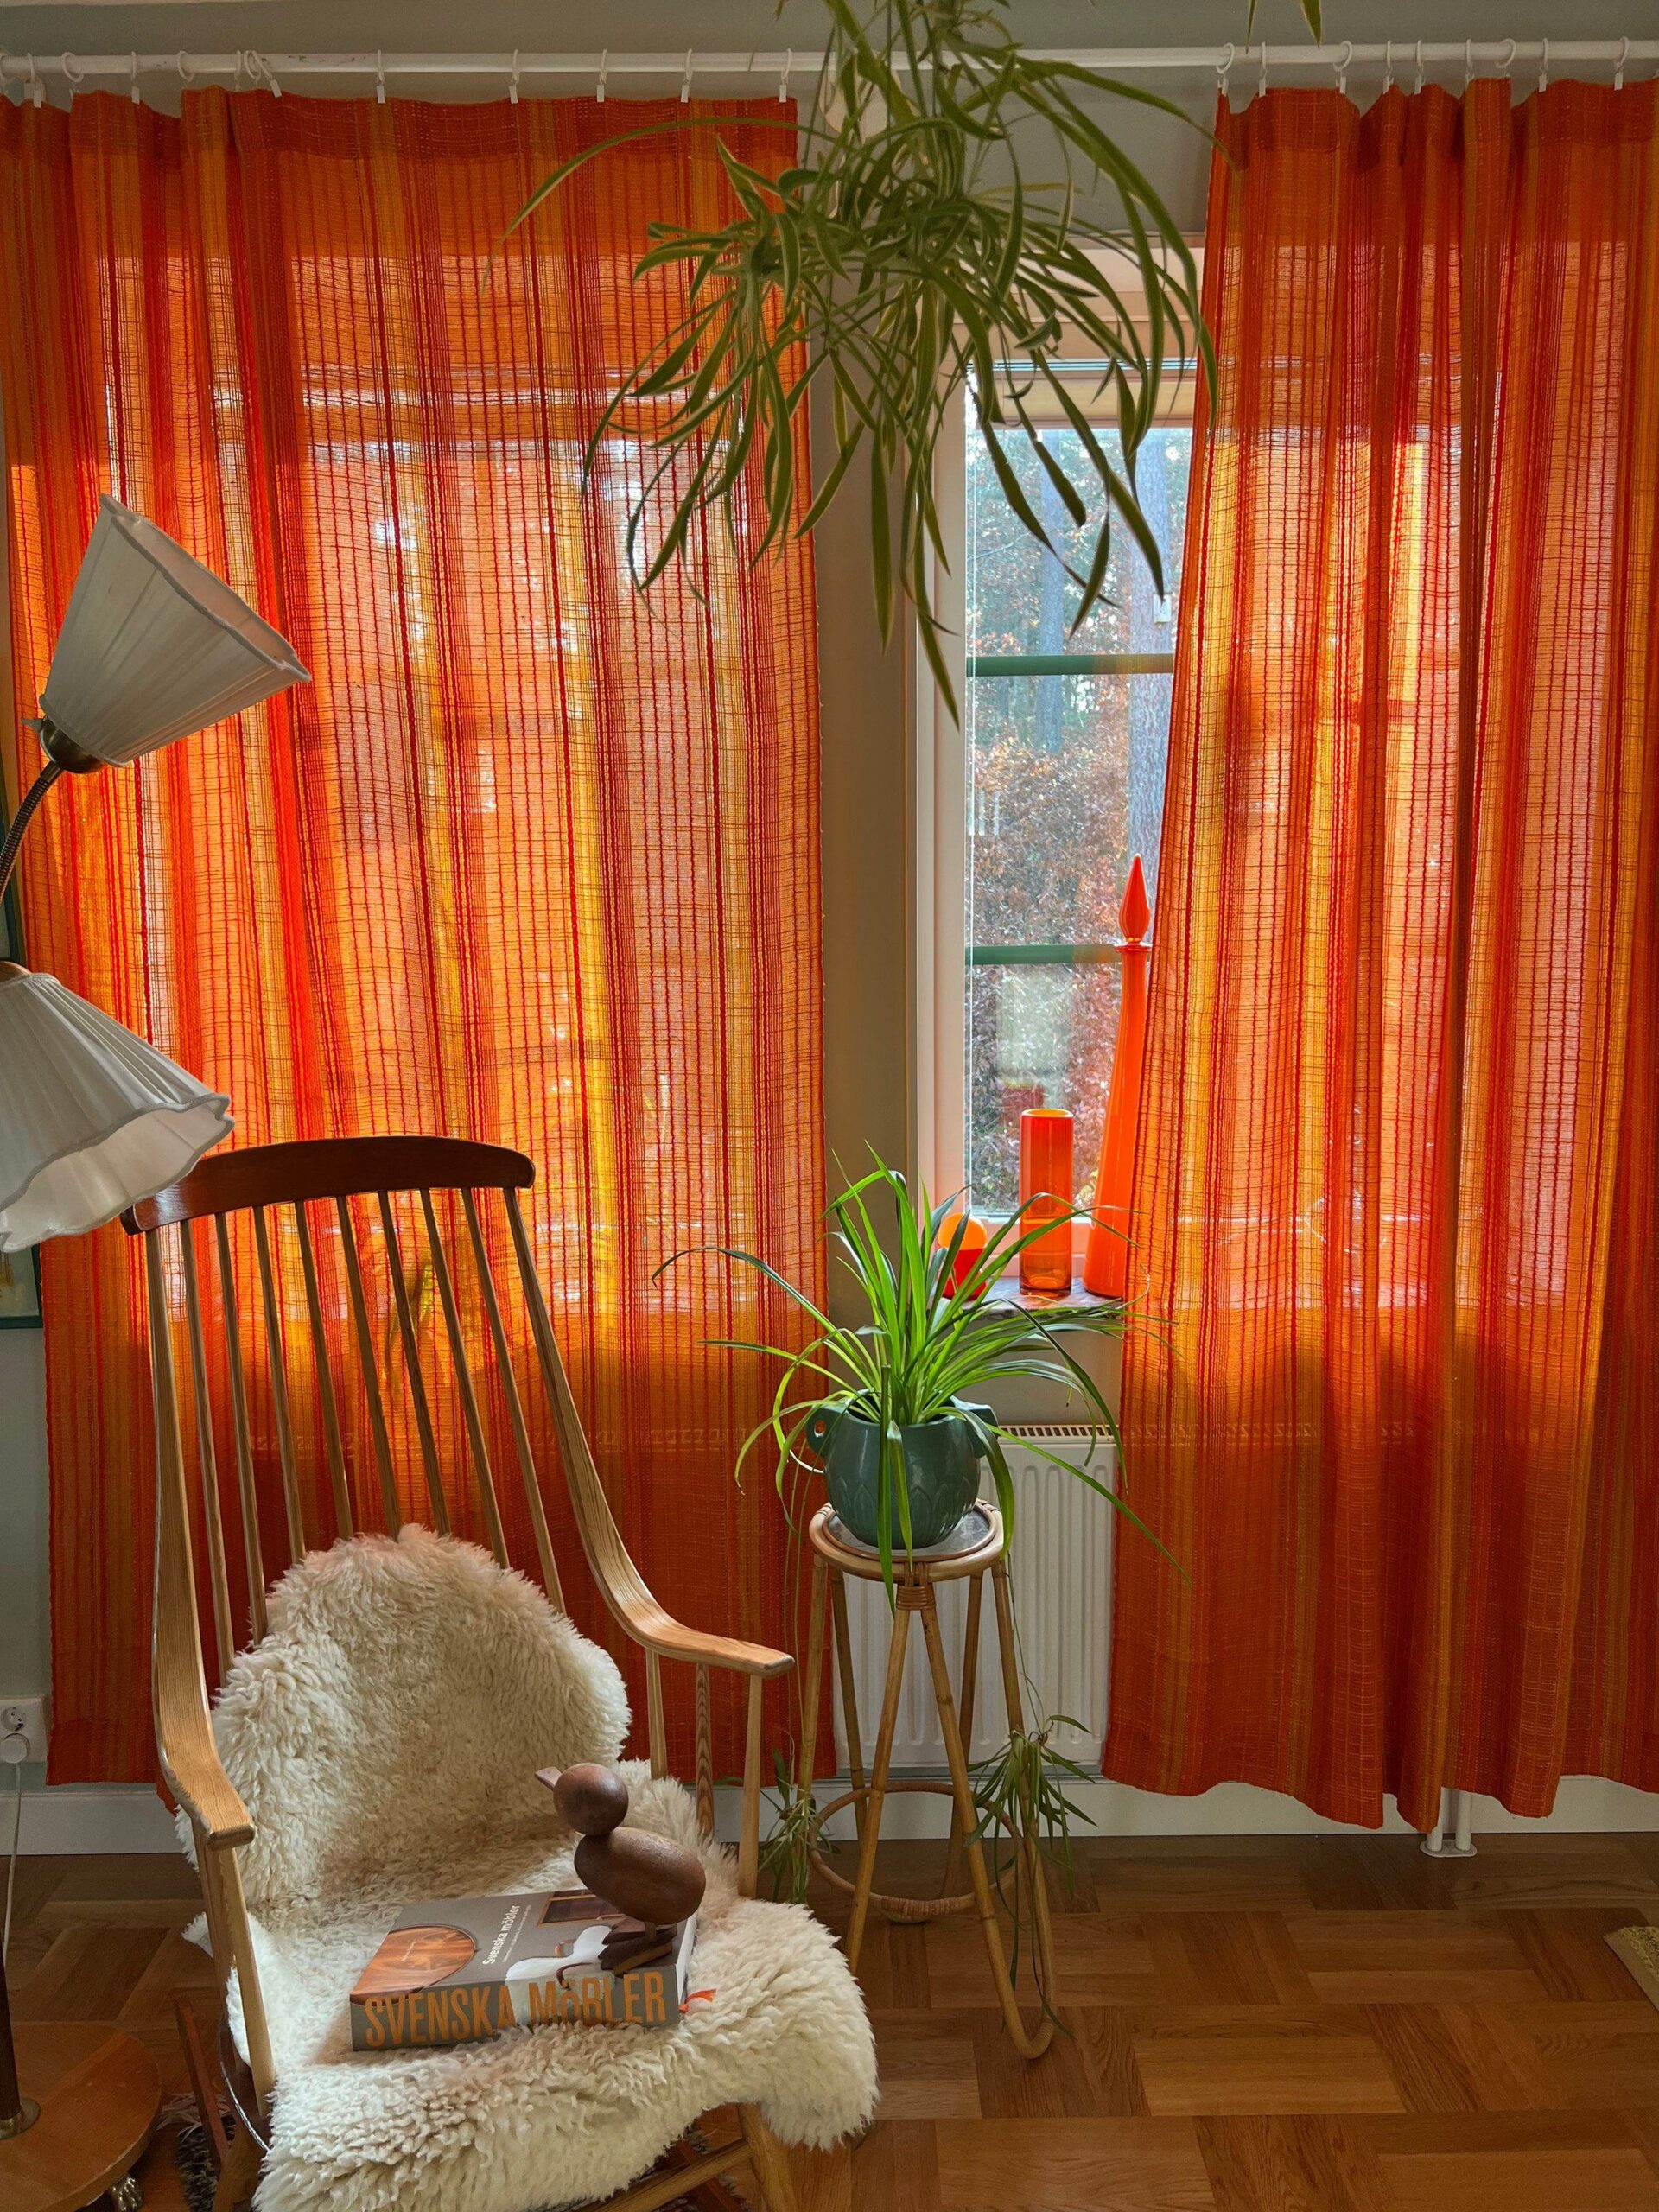 Making a Statement with Orange Curtains: Brighten Up Your Space